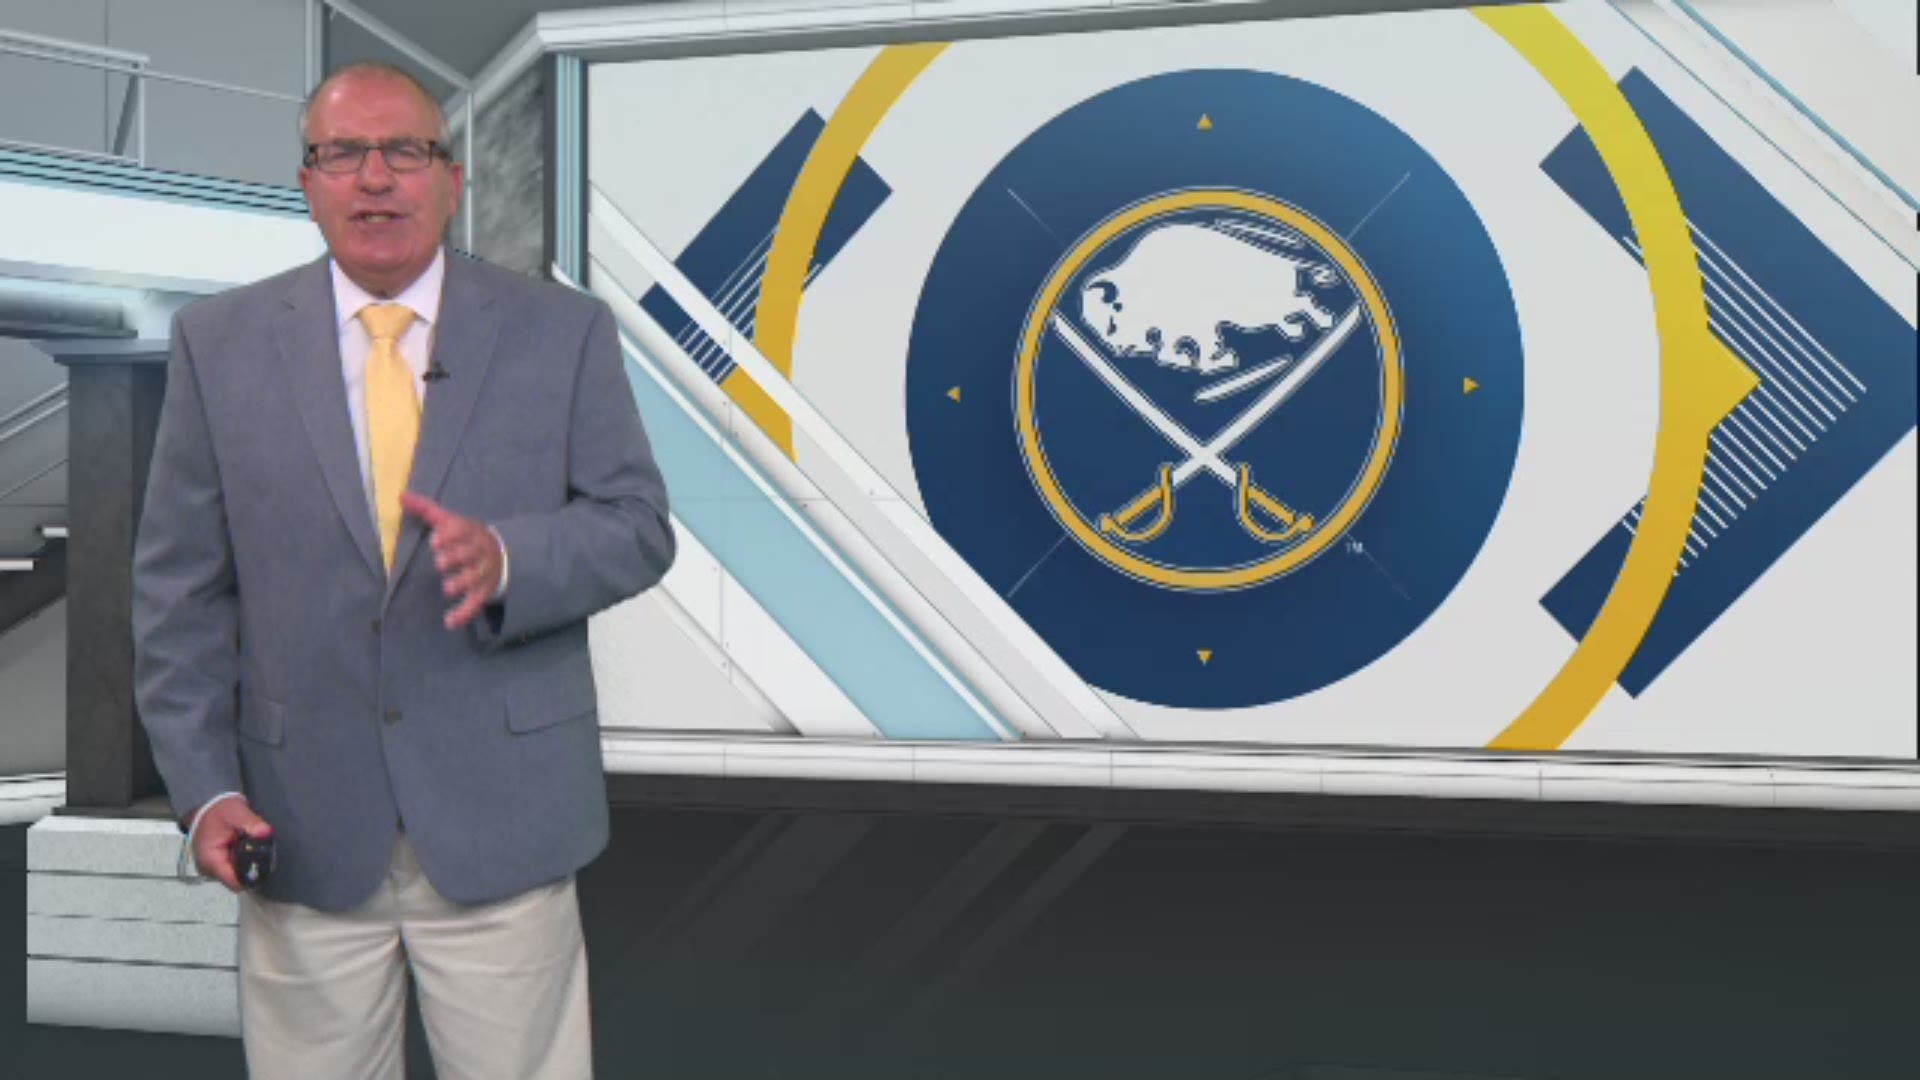 Stu Boyar shares his thoughts on the Sabres.